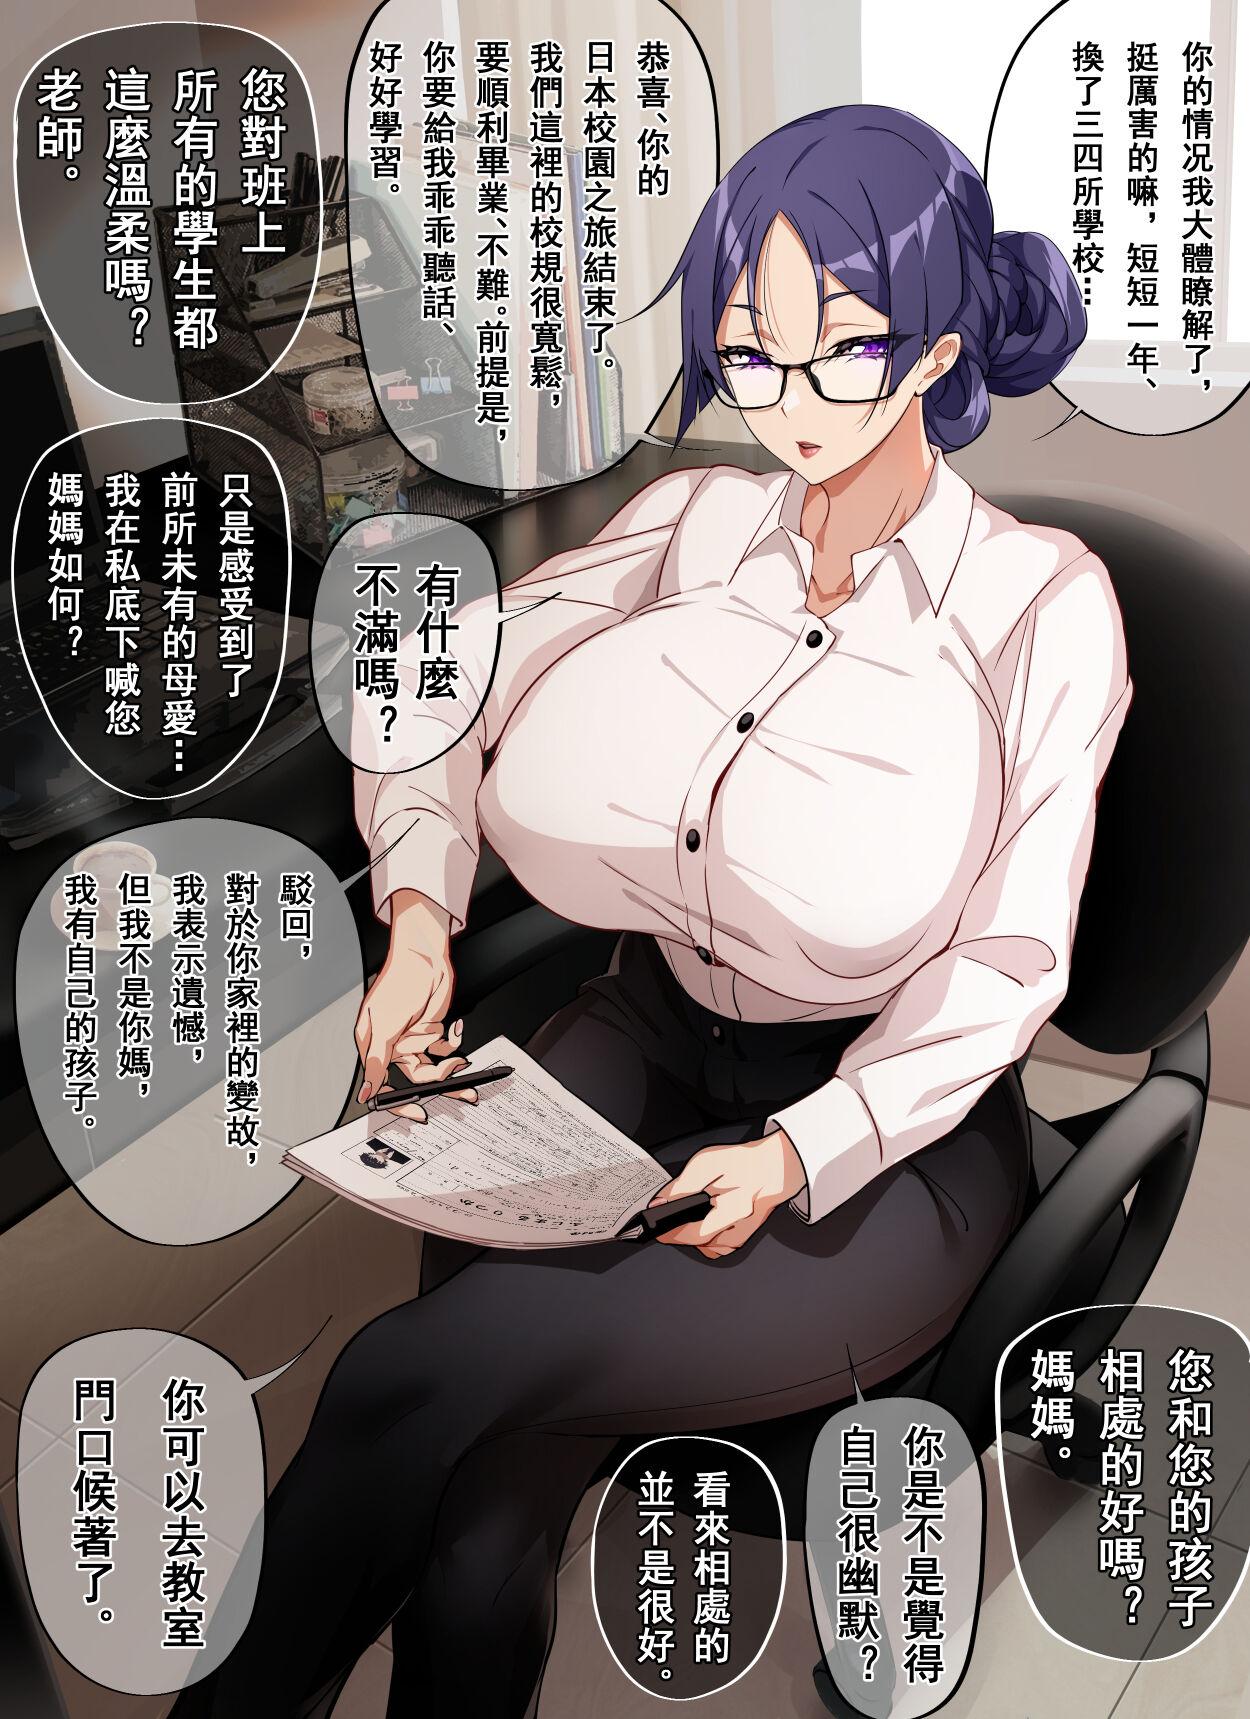 Cam Girl Teacher, can I call you mom? - Fate grand order Van - Picture 1